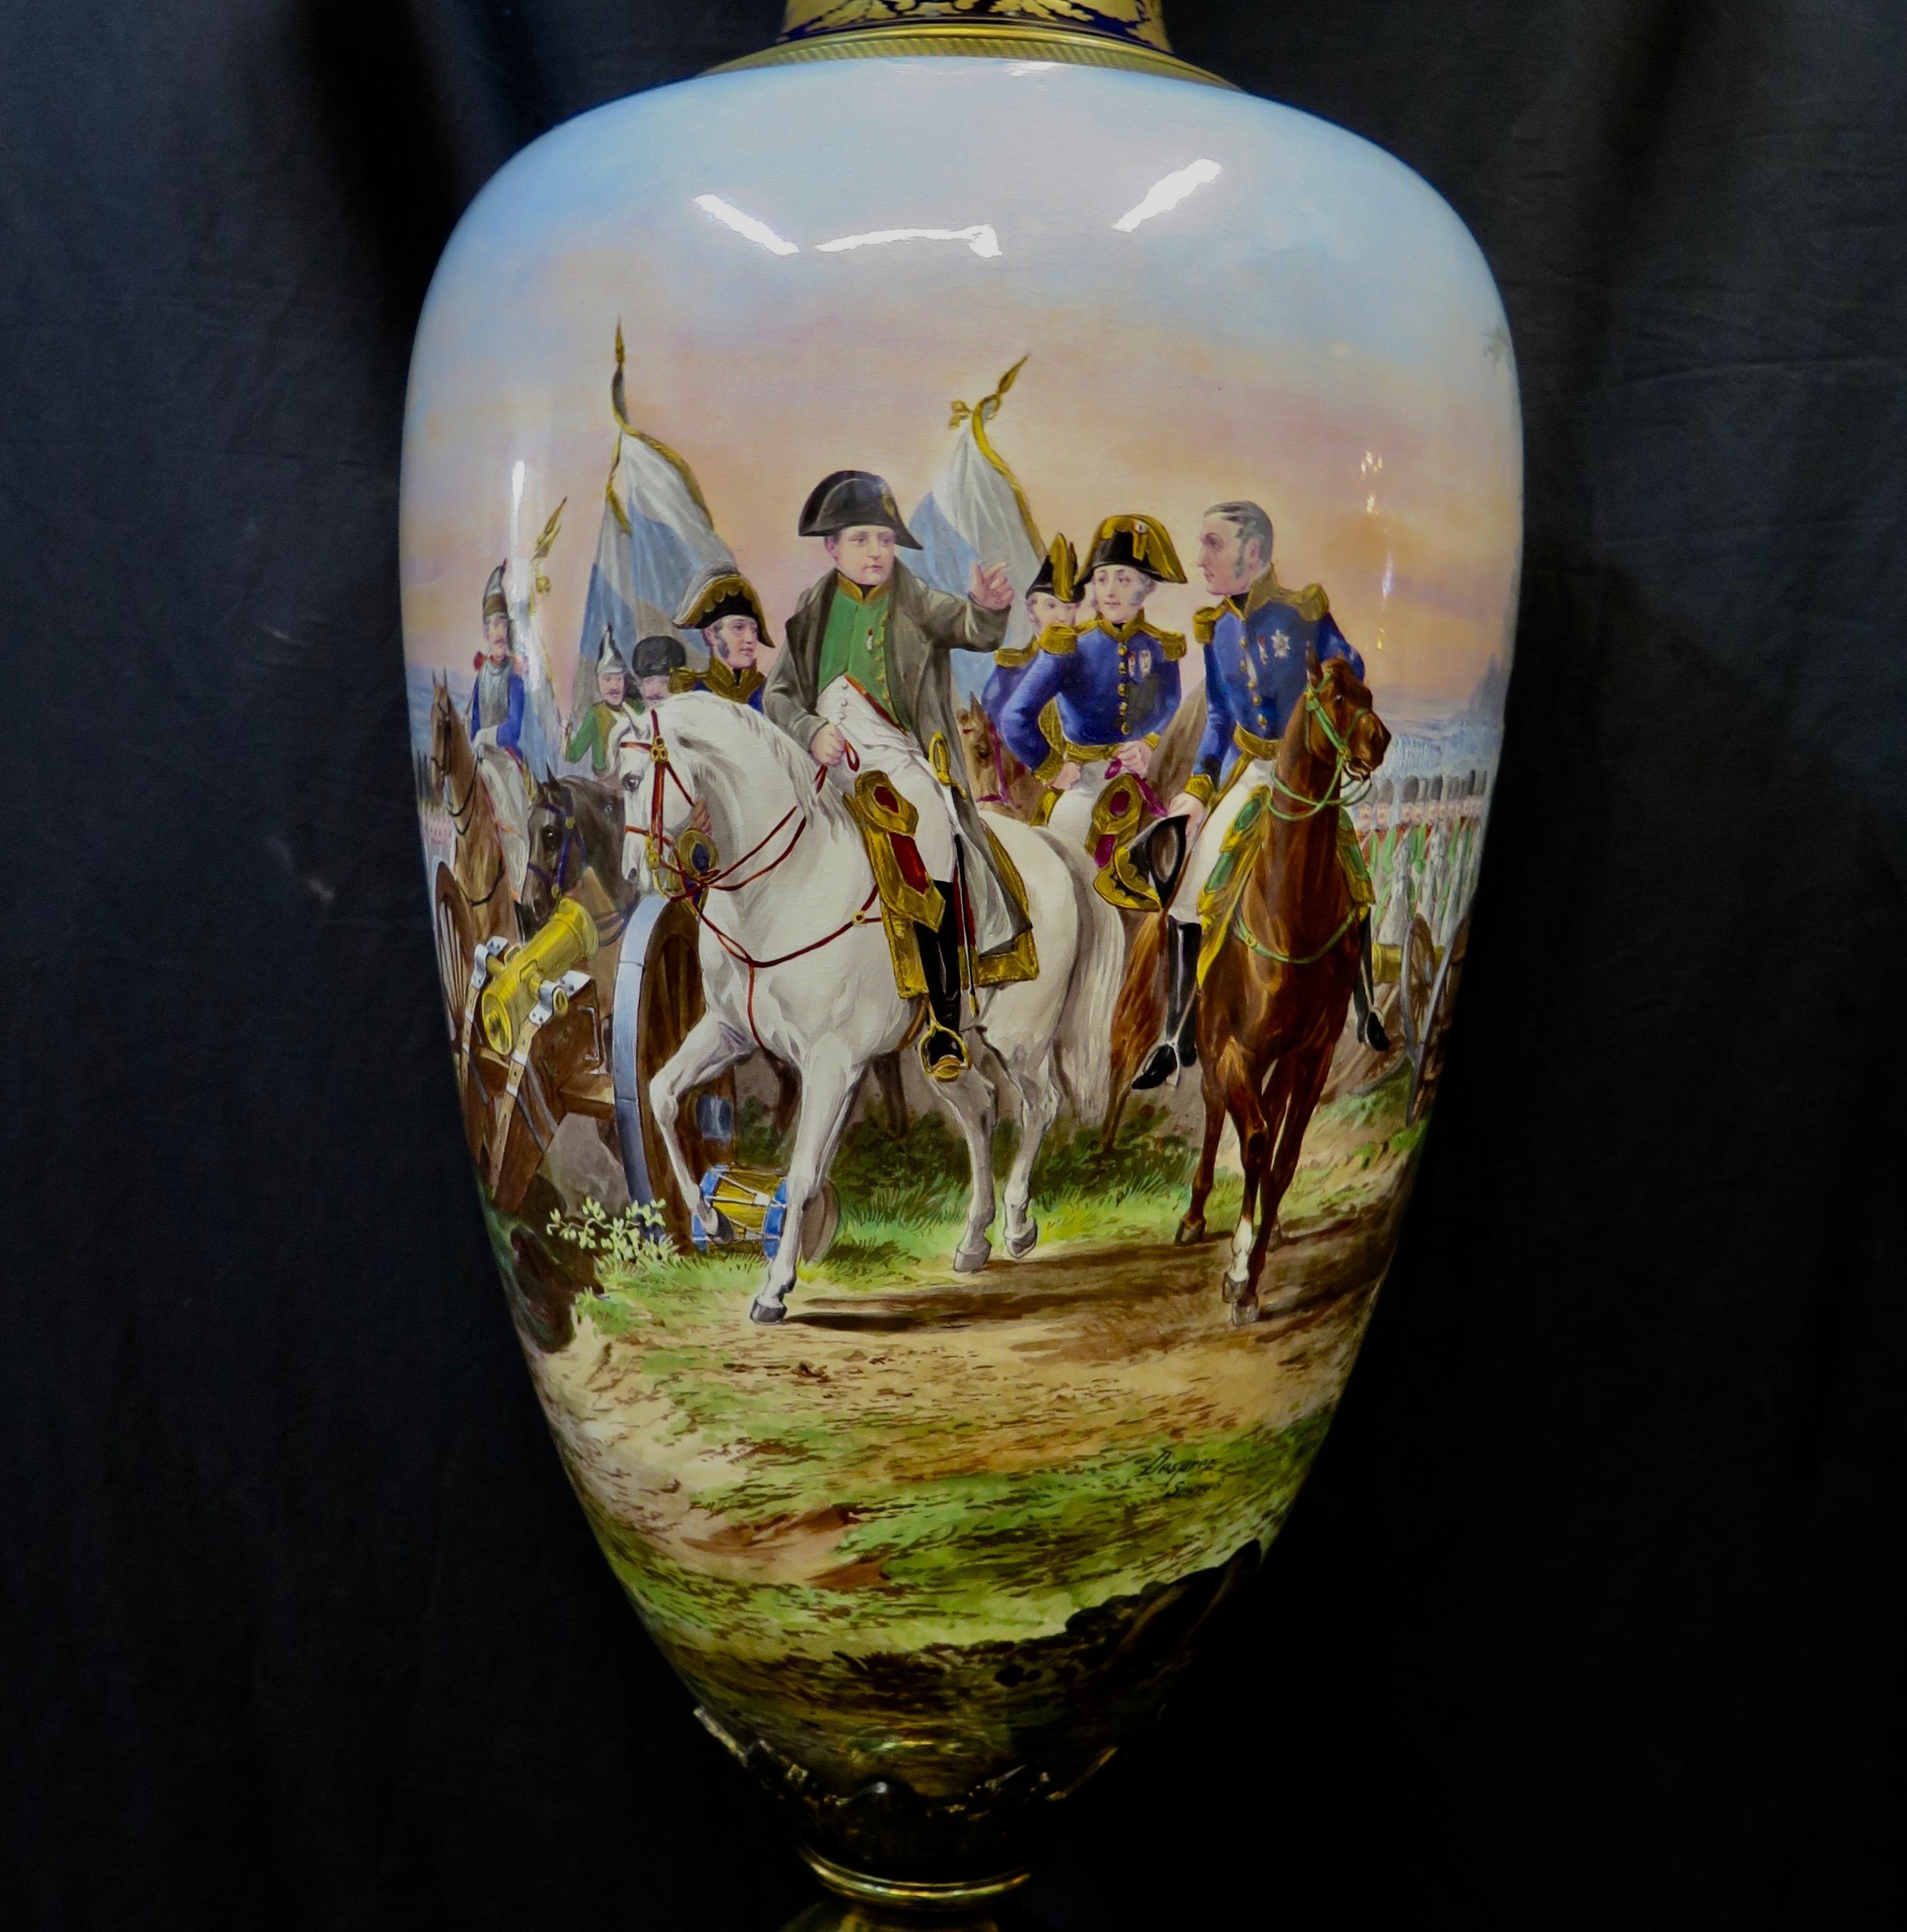 This vintage palace size Sevres porcelain covered urn is elaborately hand painted with a historical scene of Napoleon on horseback on the battlefield with his troops. The artist, Desprez painted this colorful detailed painting surrounding the entire